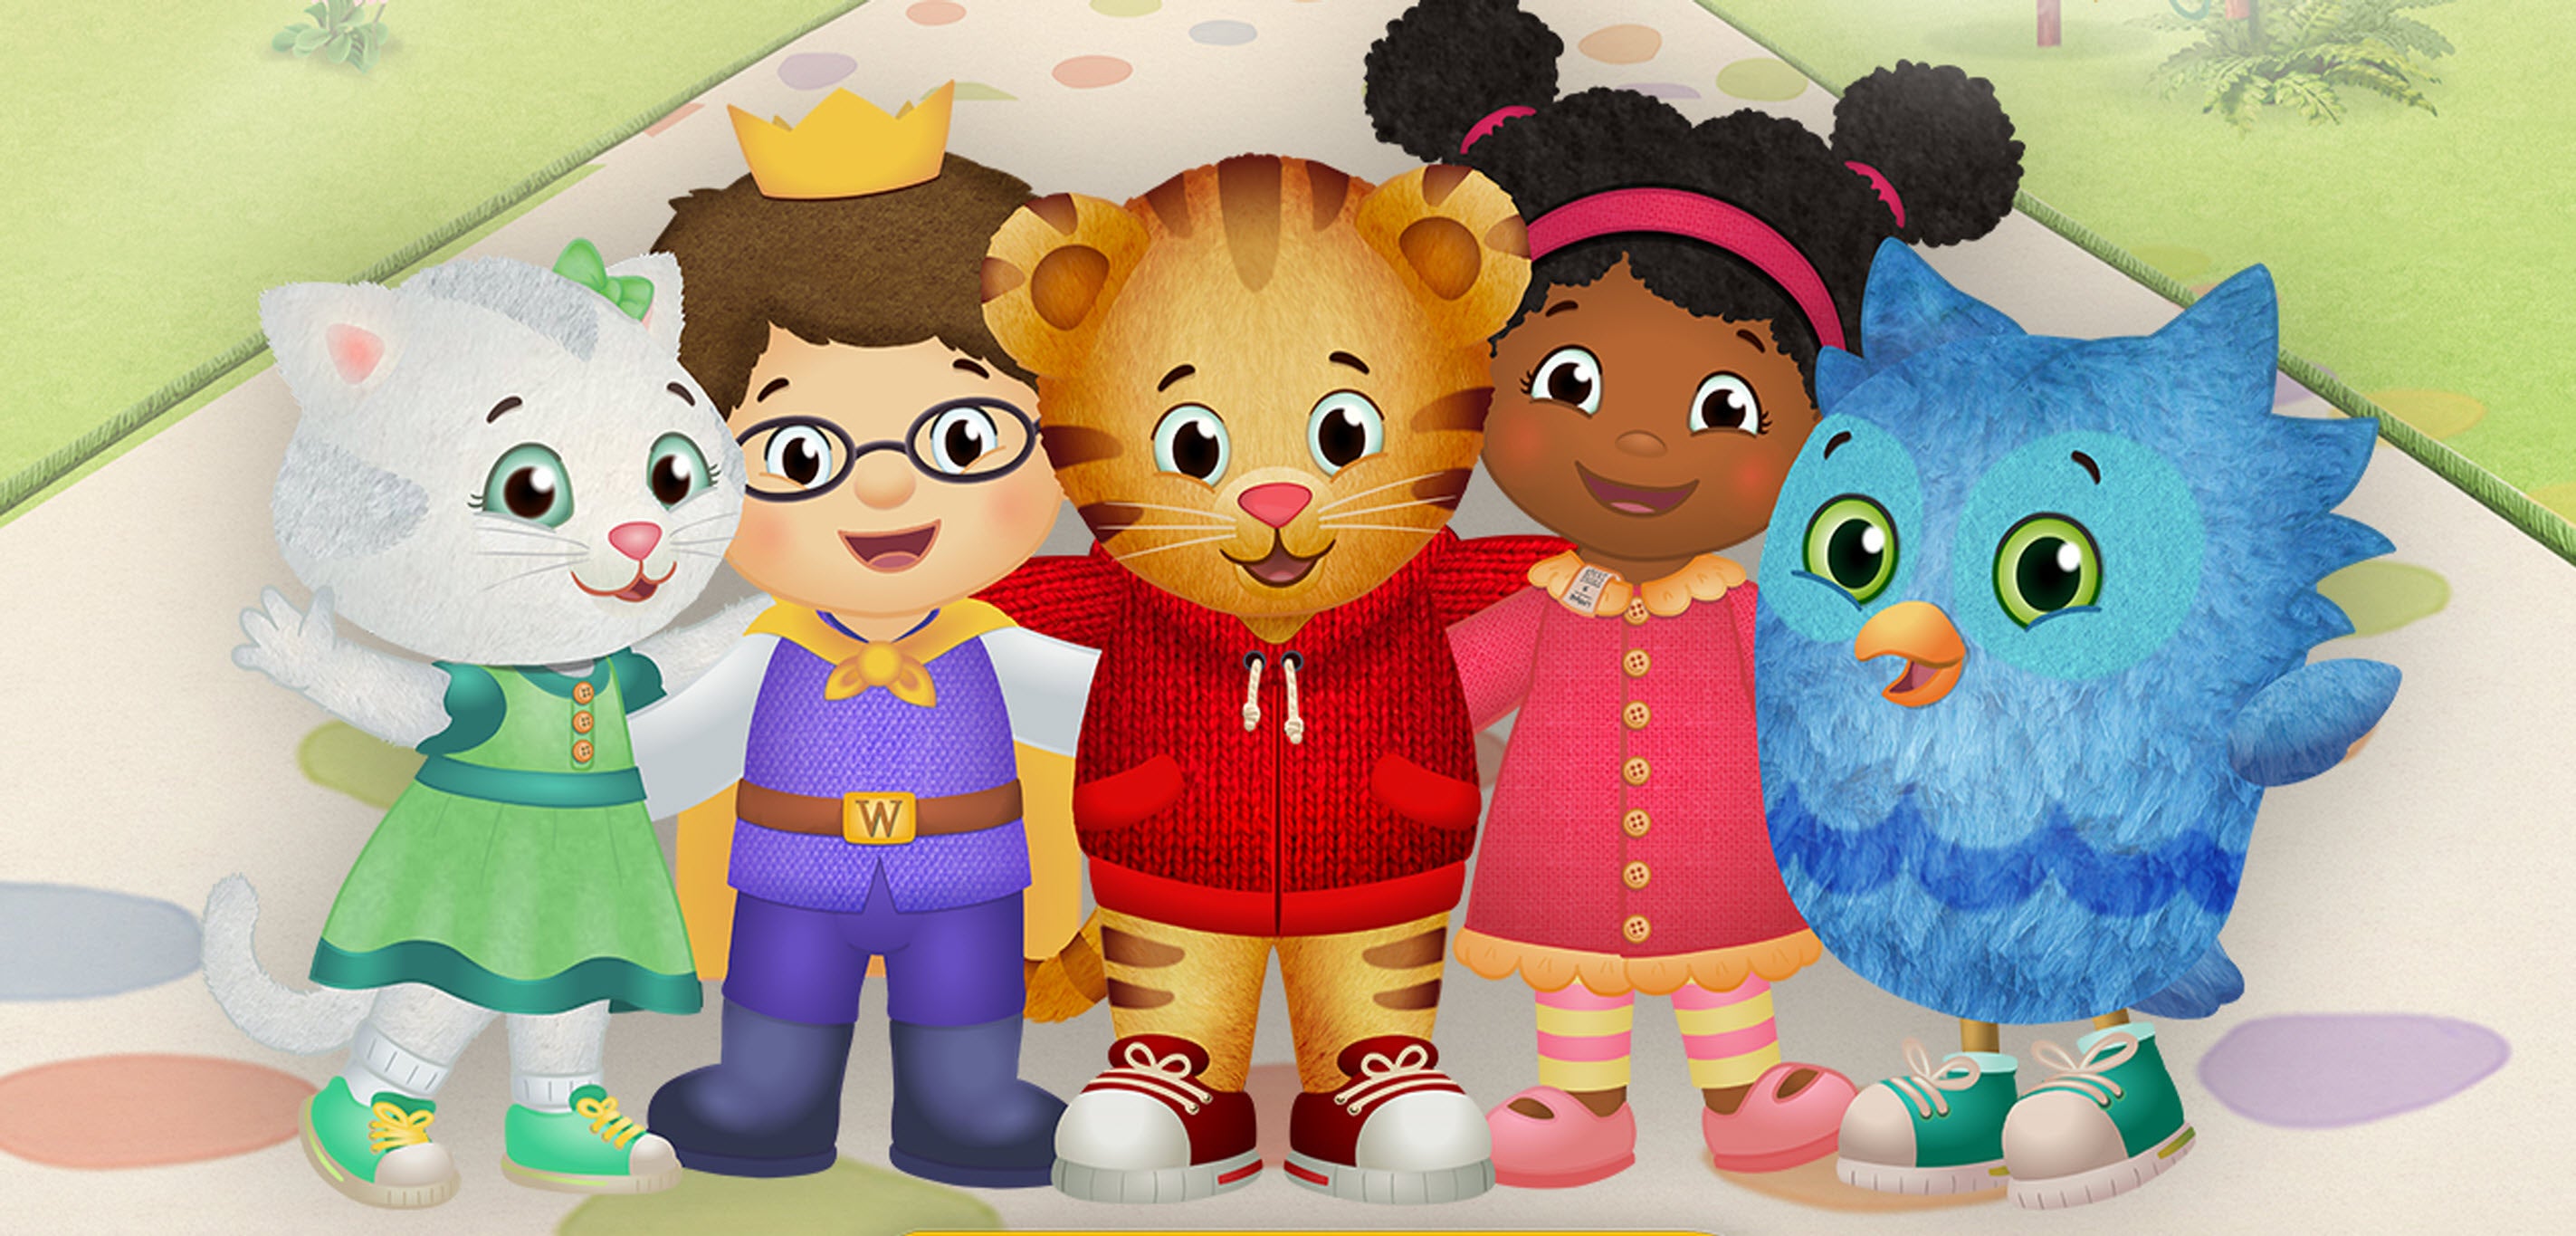 Daniel Tiger's Neighborhood LIVE! King For A Day in Thousand Oaks promo photo for Ticketmaster CEN presale offer code